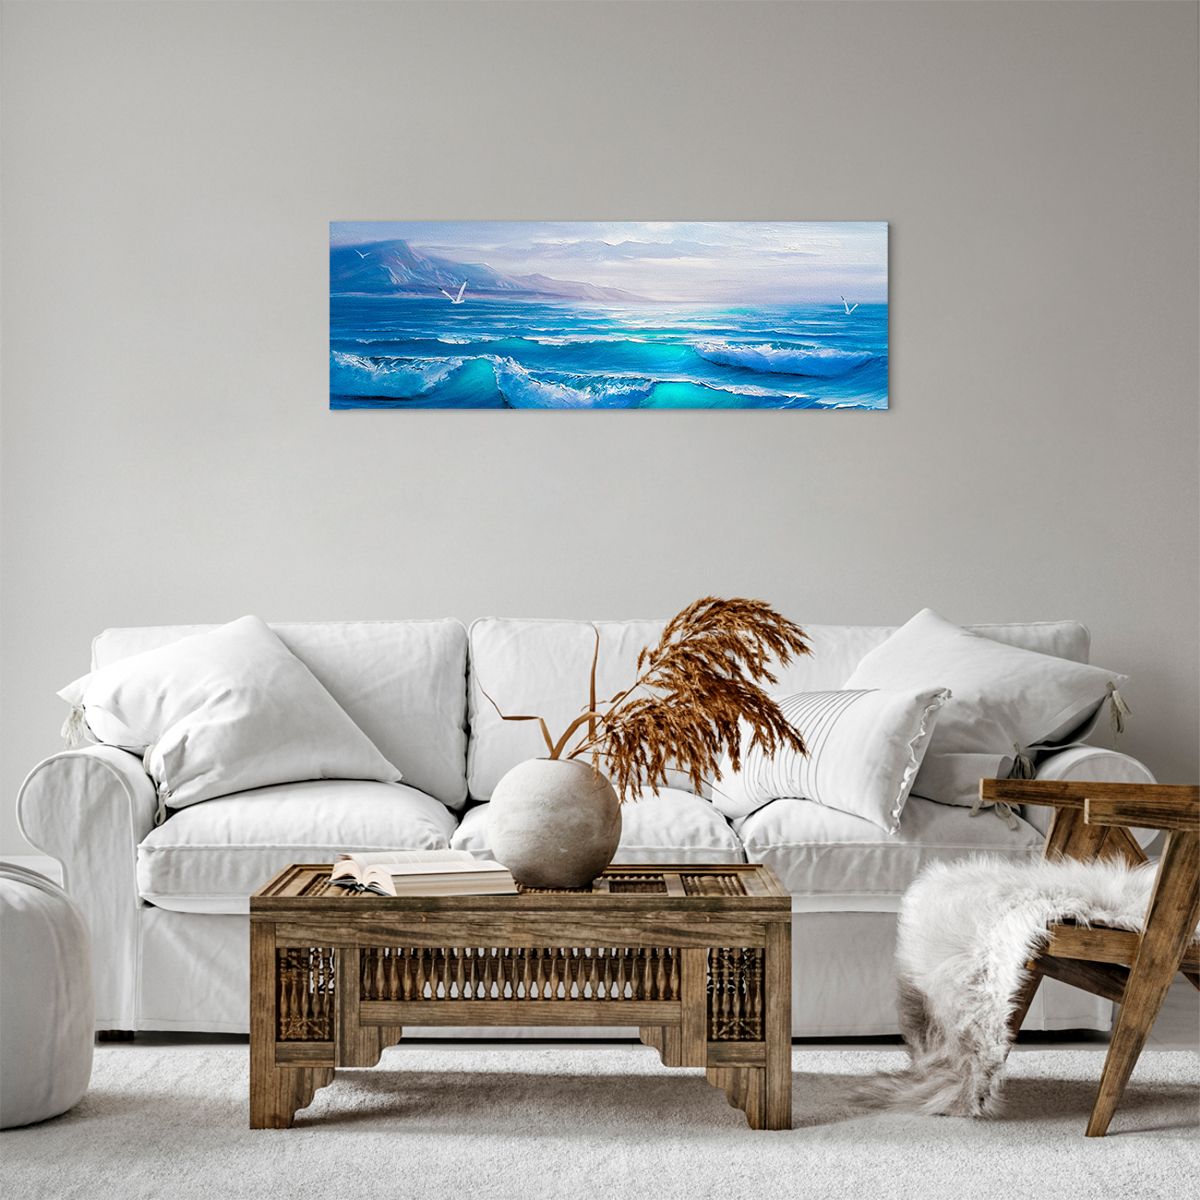 Impression sur toile Abstraction, Impression sur toile Mer, Impression sur toile Graphique, Impression sur toile Mouette, Impression sur toile Paysage